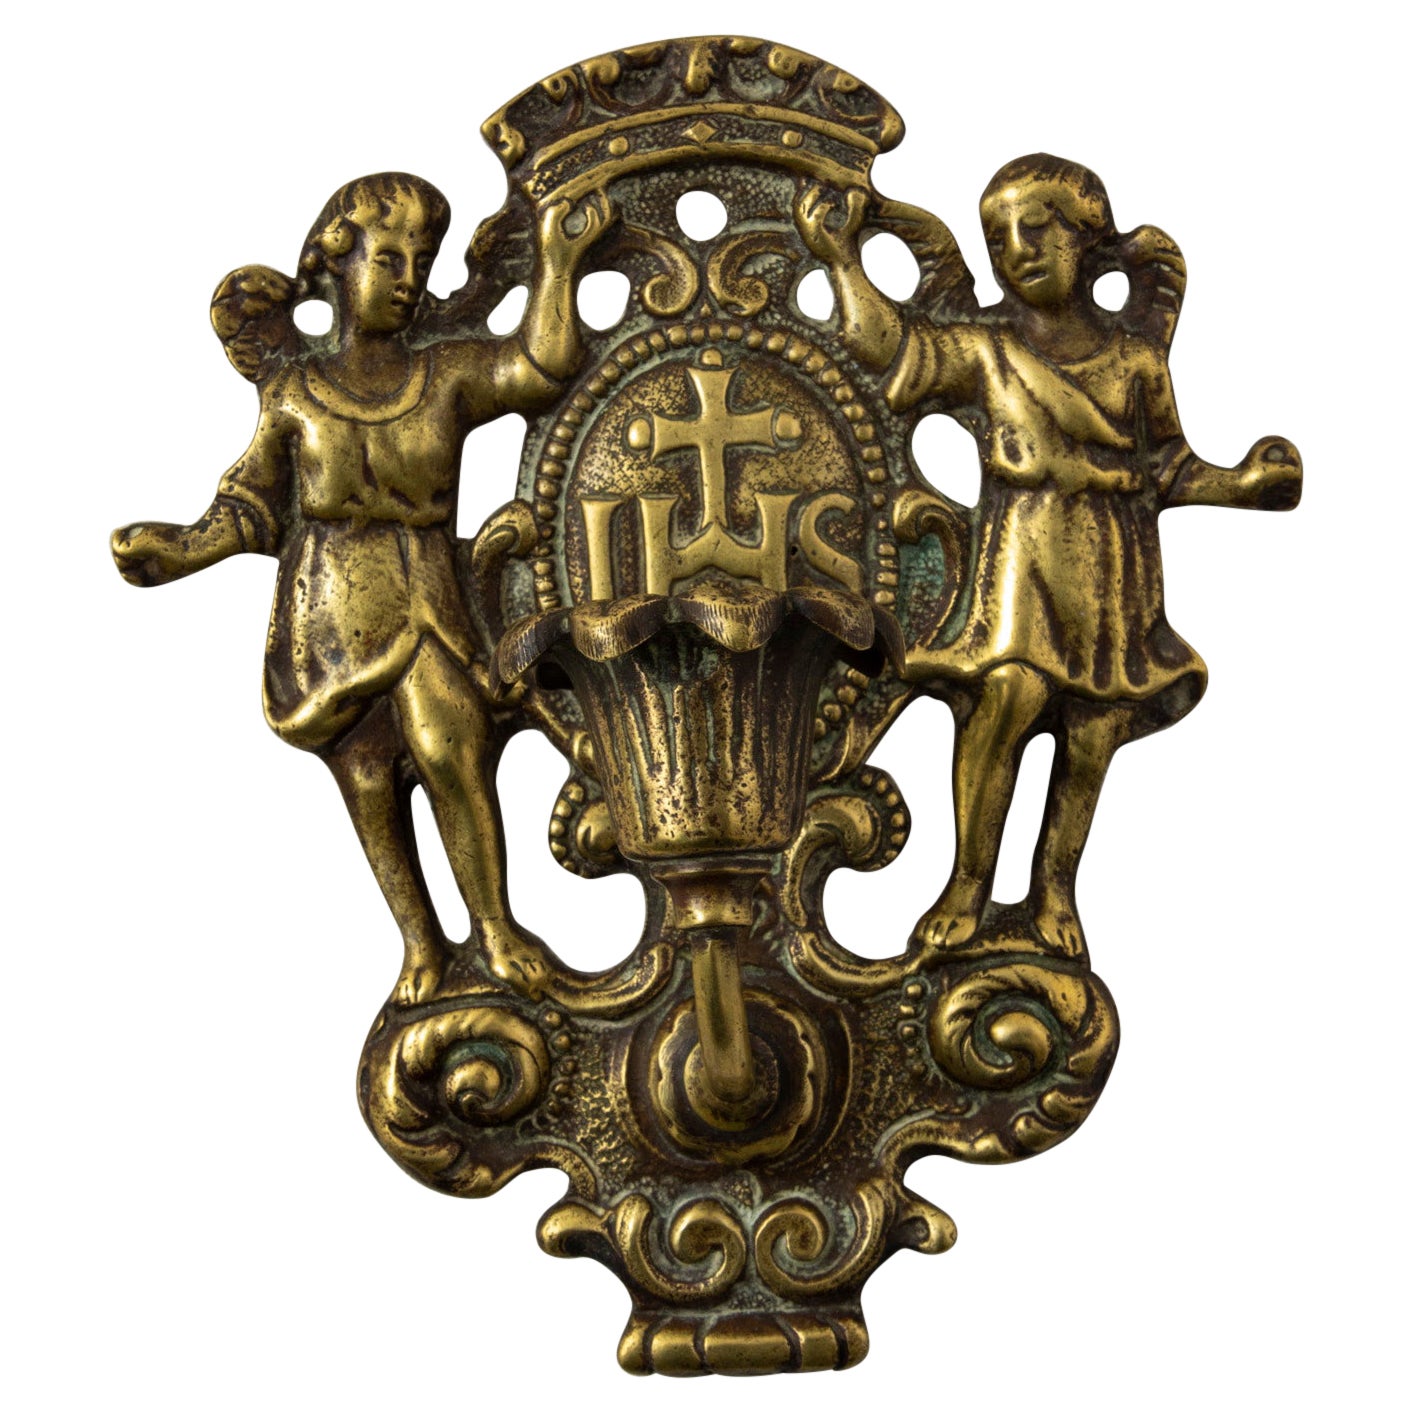 Mid-19th Century French Bronze Religious Candleholder or Sconce with Angels